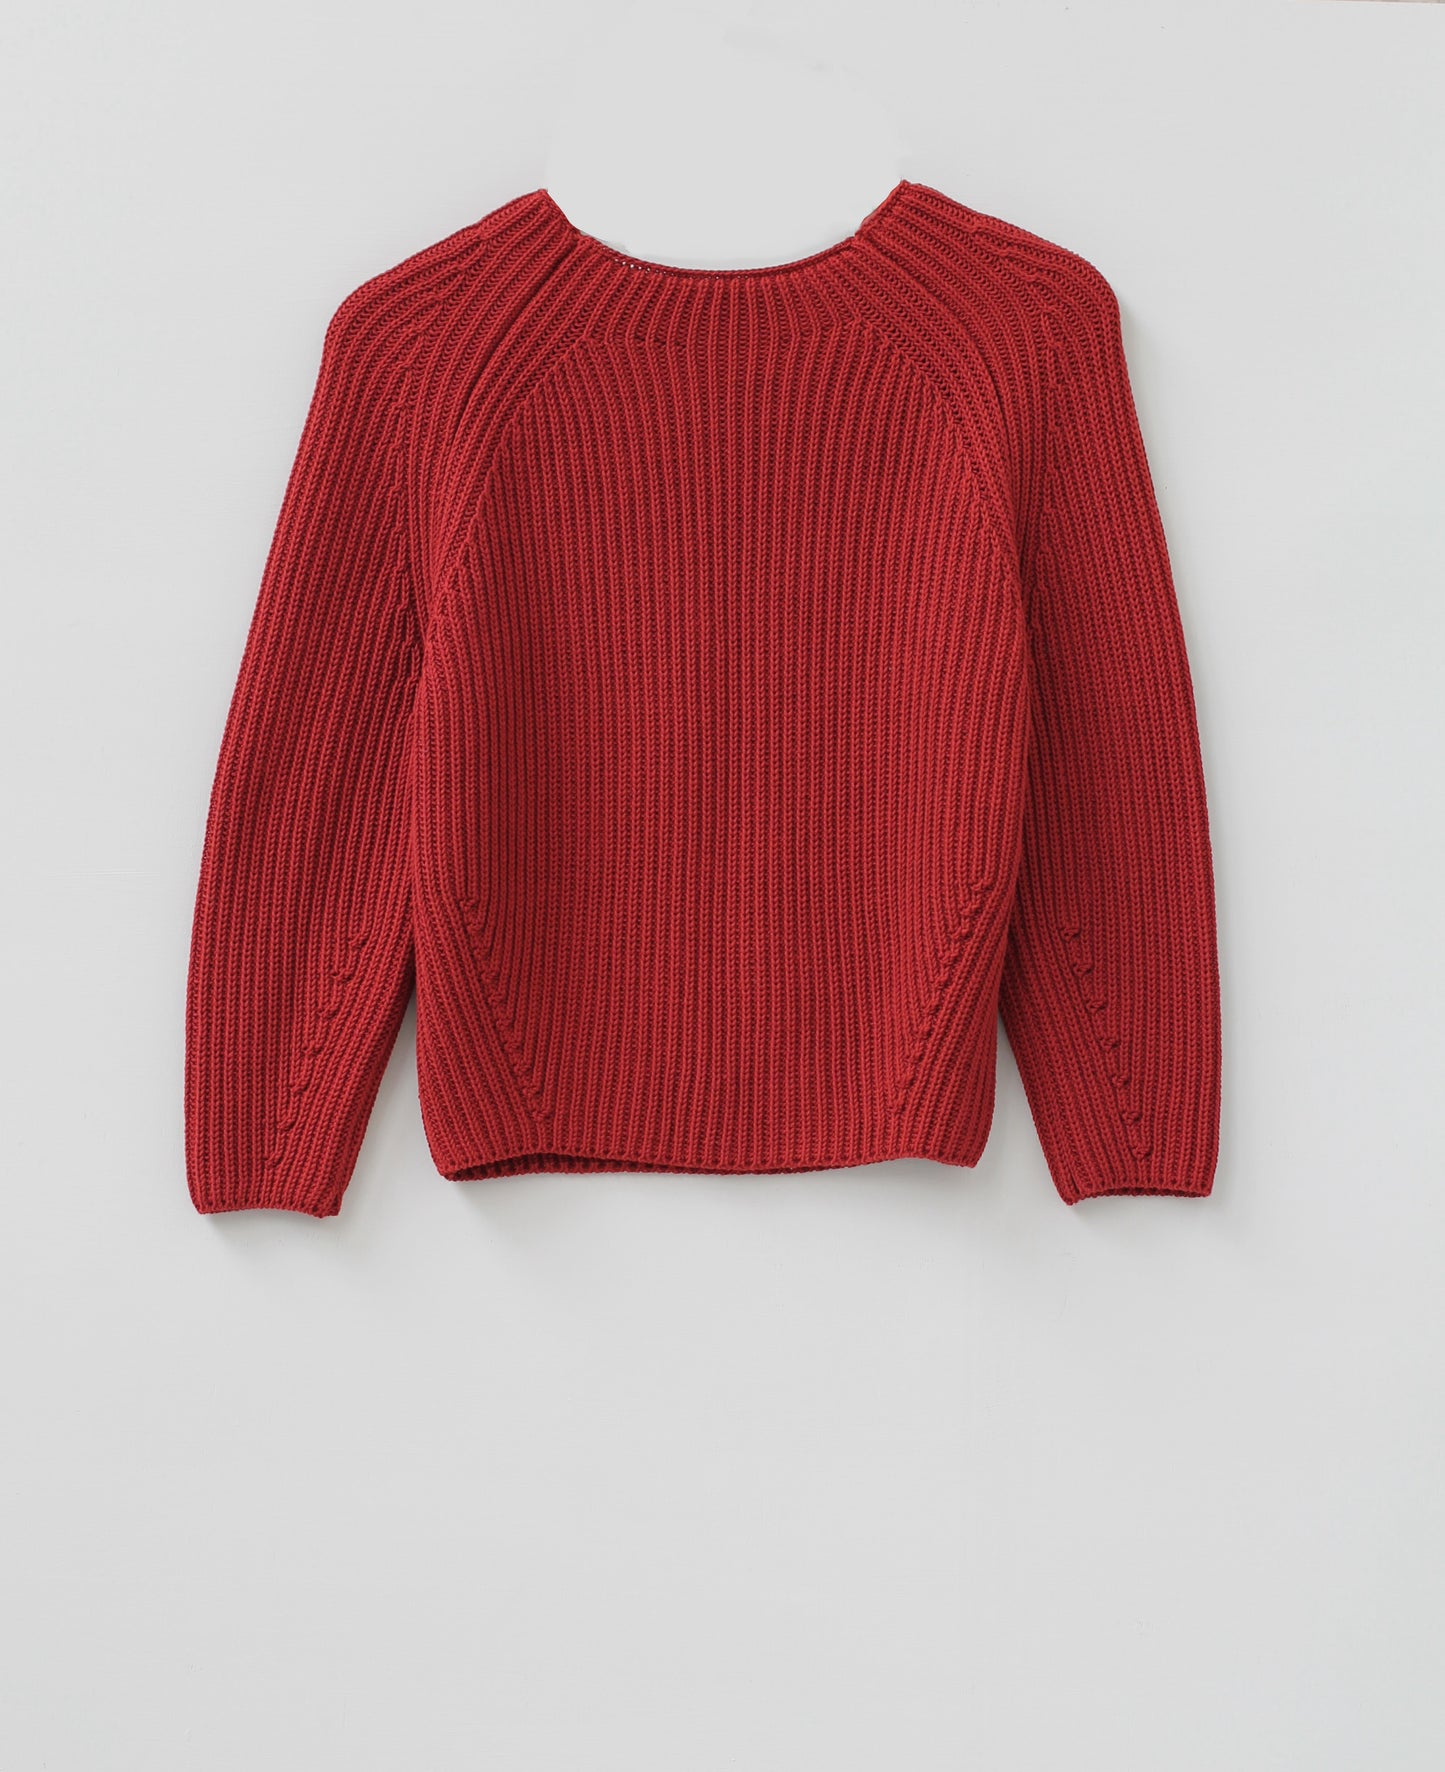 The Claife Organic Cotton Fisherman Rib Sweater in Rich Red